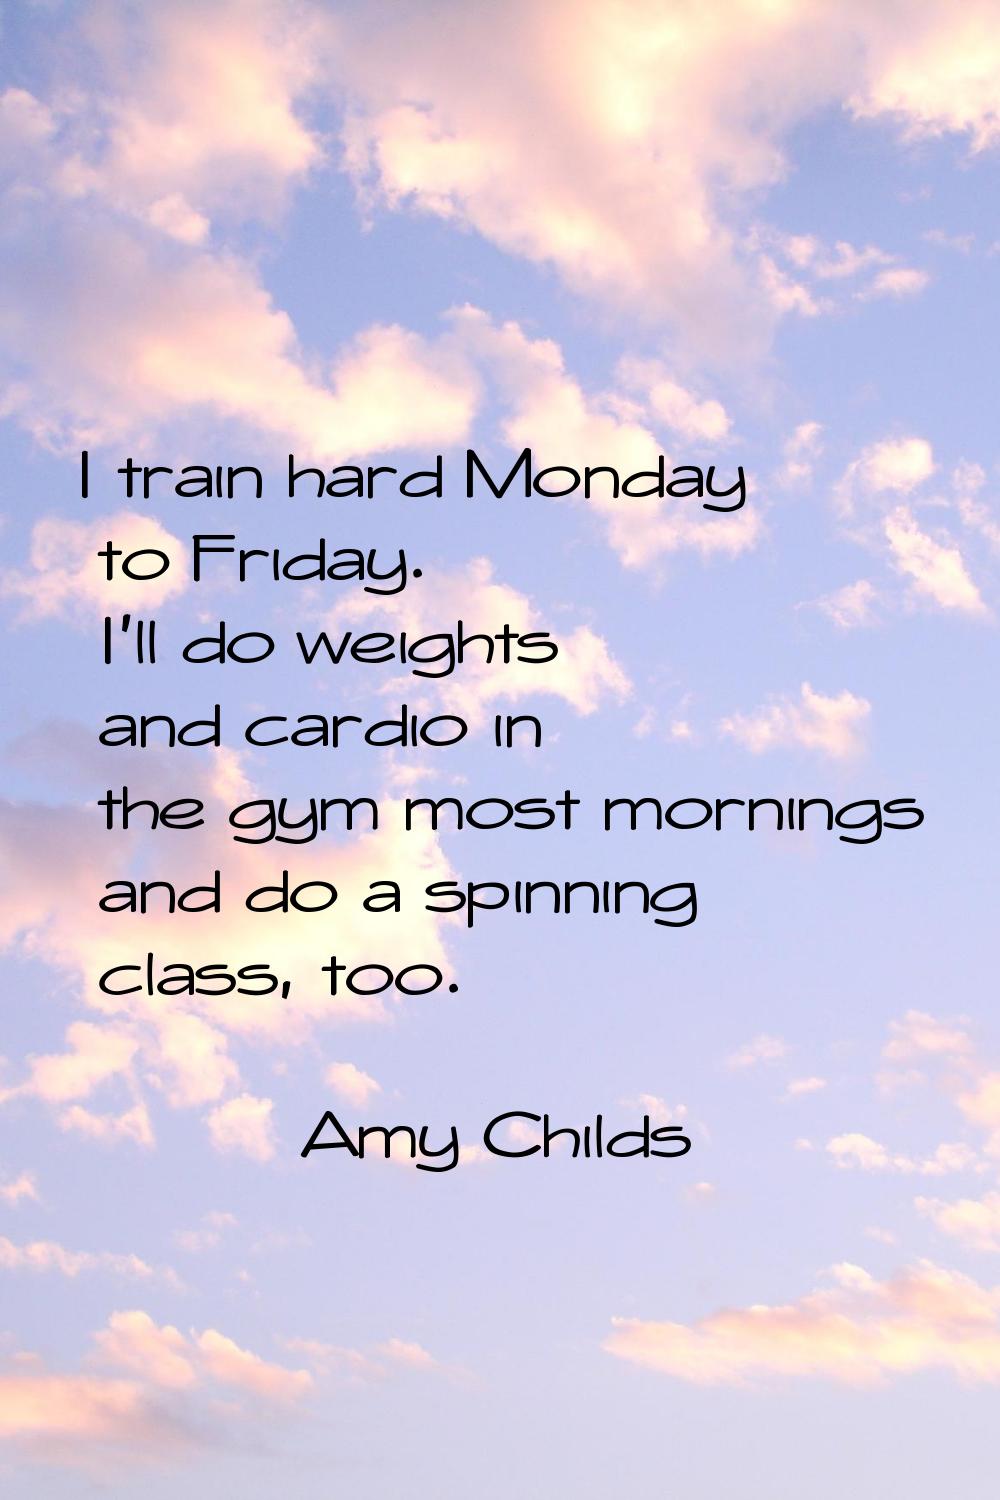 I train hard Monday to Friday. I'll do weights and cardio in the gym most mornings and do a spinnin